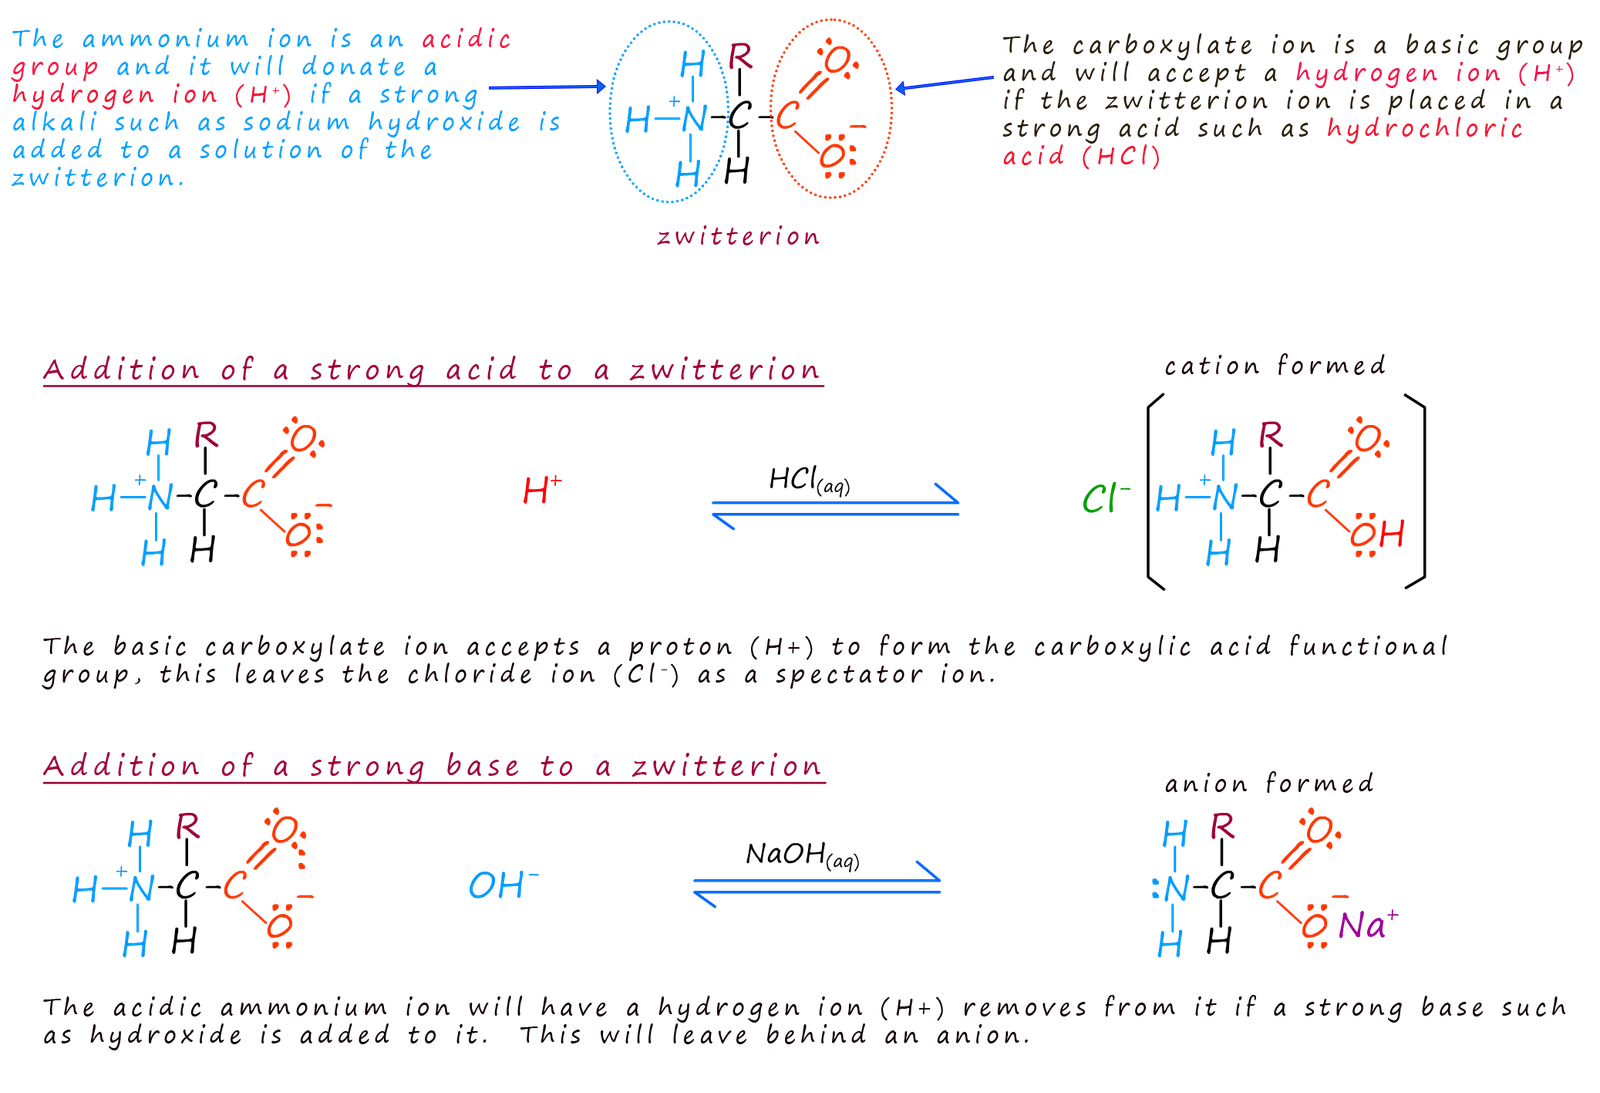 formation of cation and anion from zwitterions by the addition of a strong acid or base